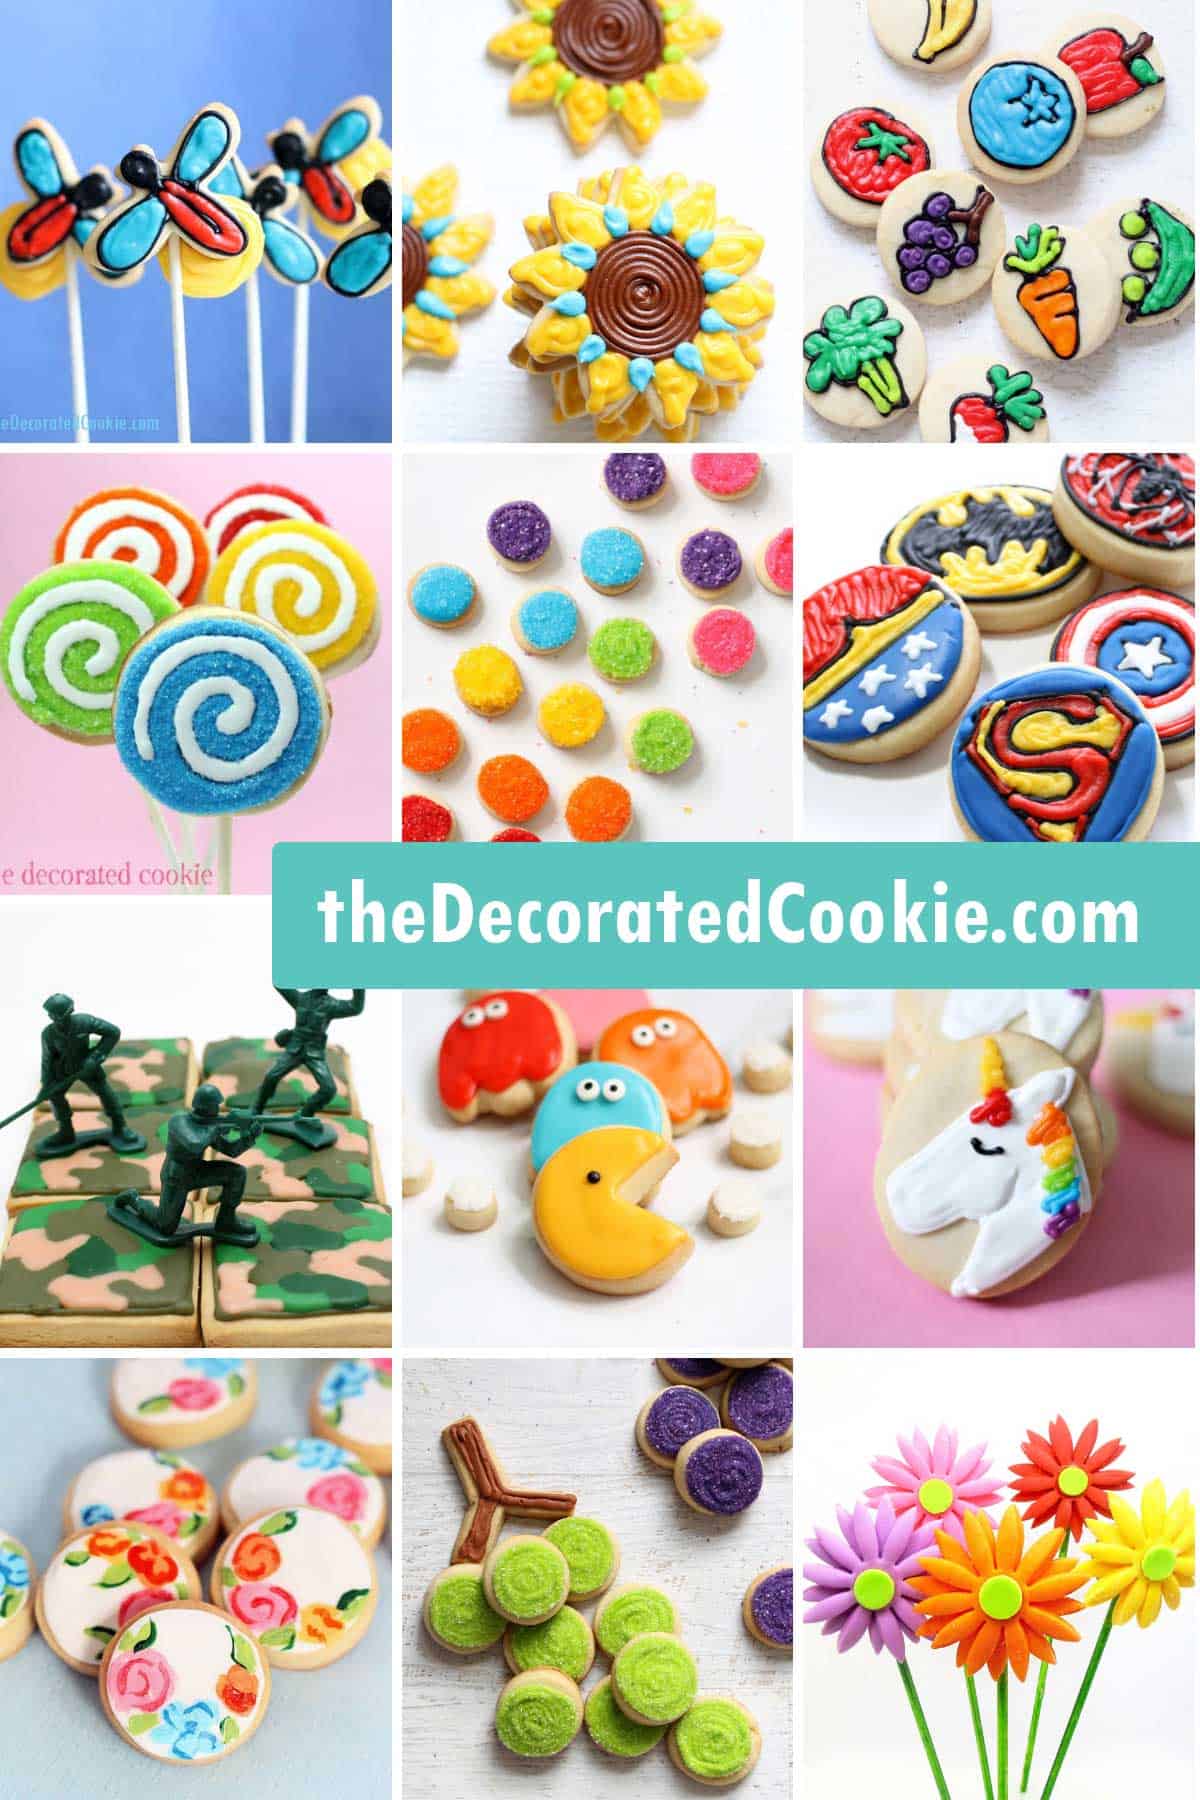 cookie collage from theDecoratedCookie.com